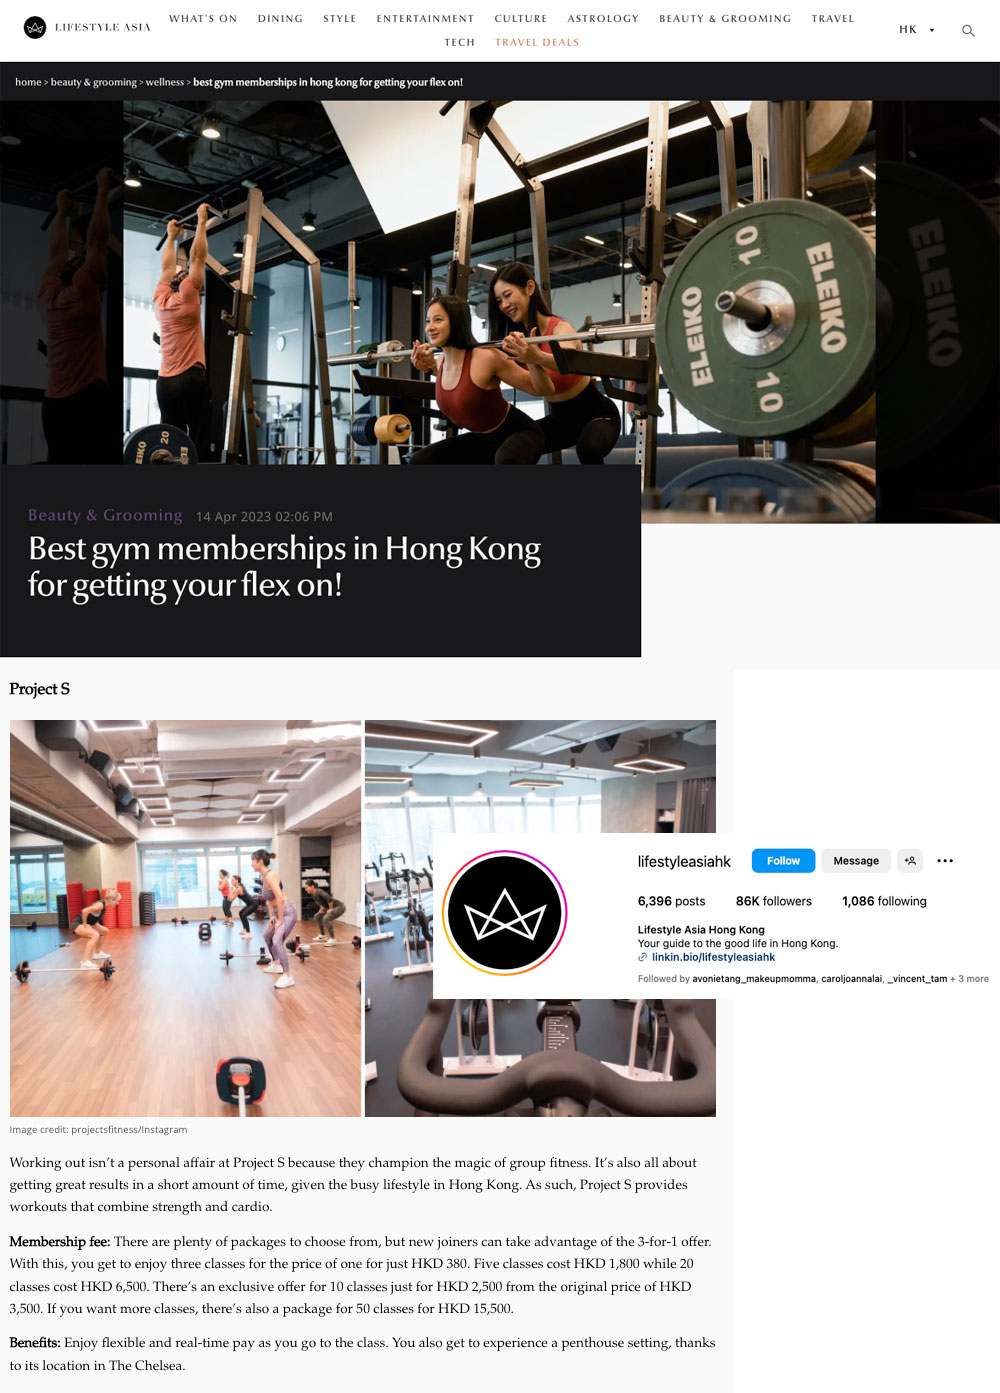 Best Gym Memberships in HK for Getting Your Flex on